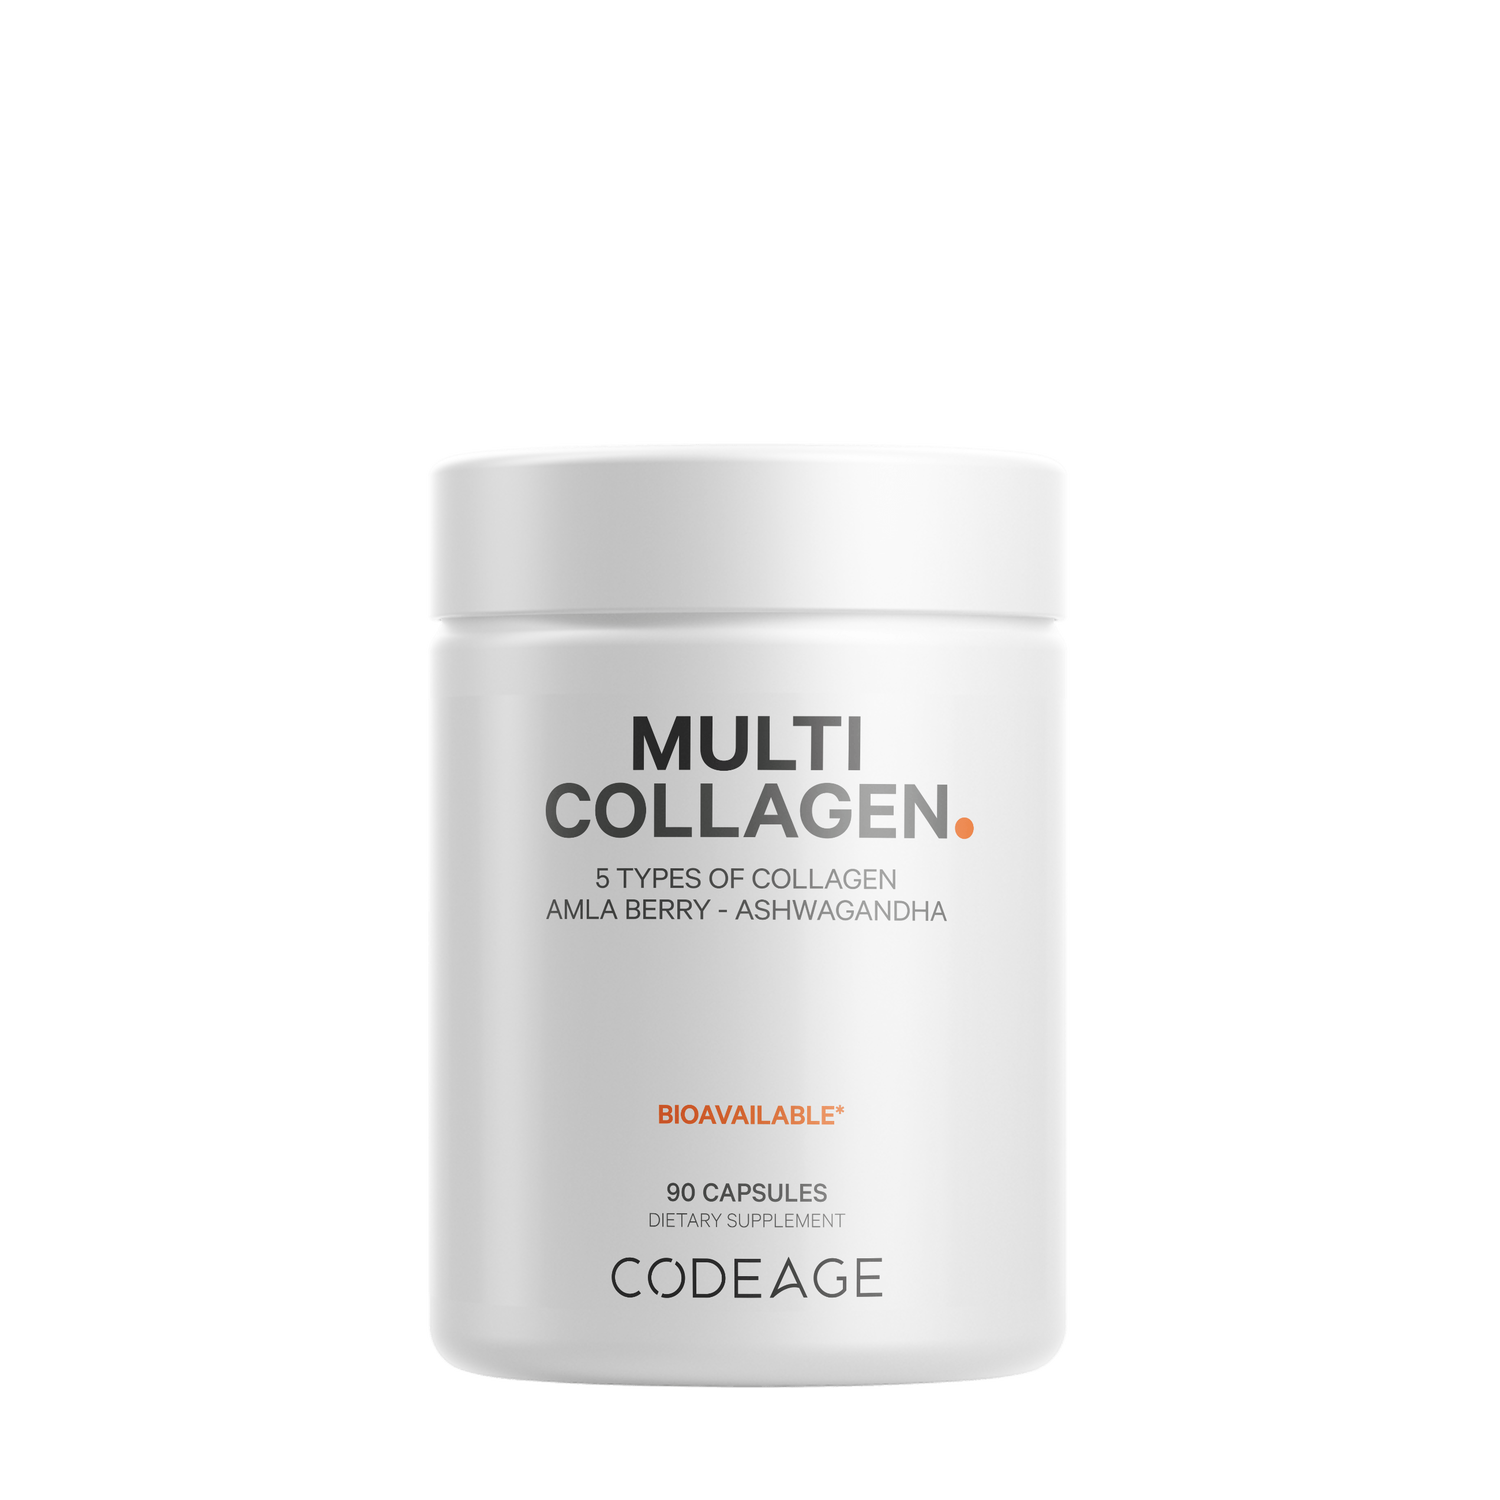 Codeage Hydrolyzed Multi Collagen Peptides Type I - Ii - Iii - V and X + Vitamin C - 90 Capsules (30 Servings)